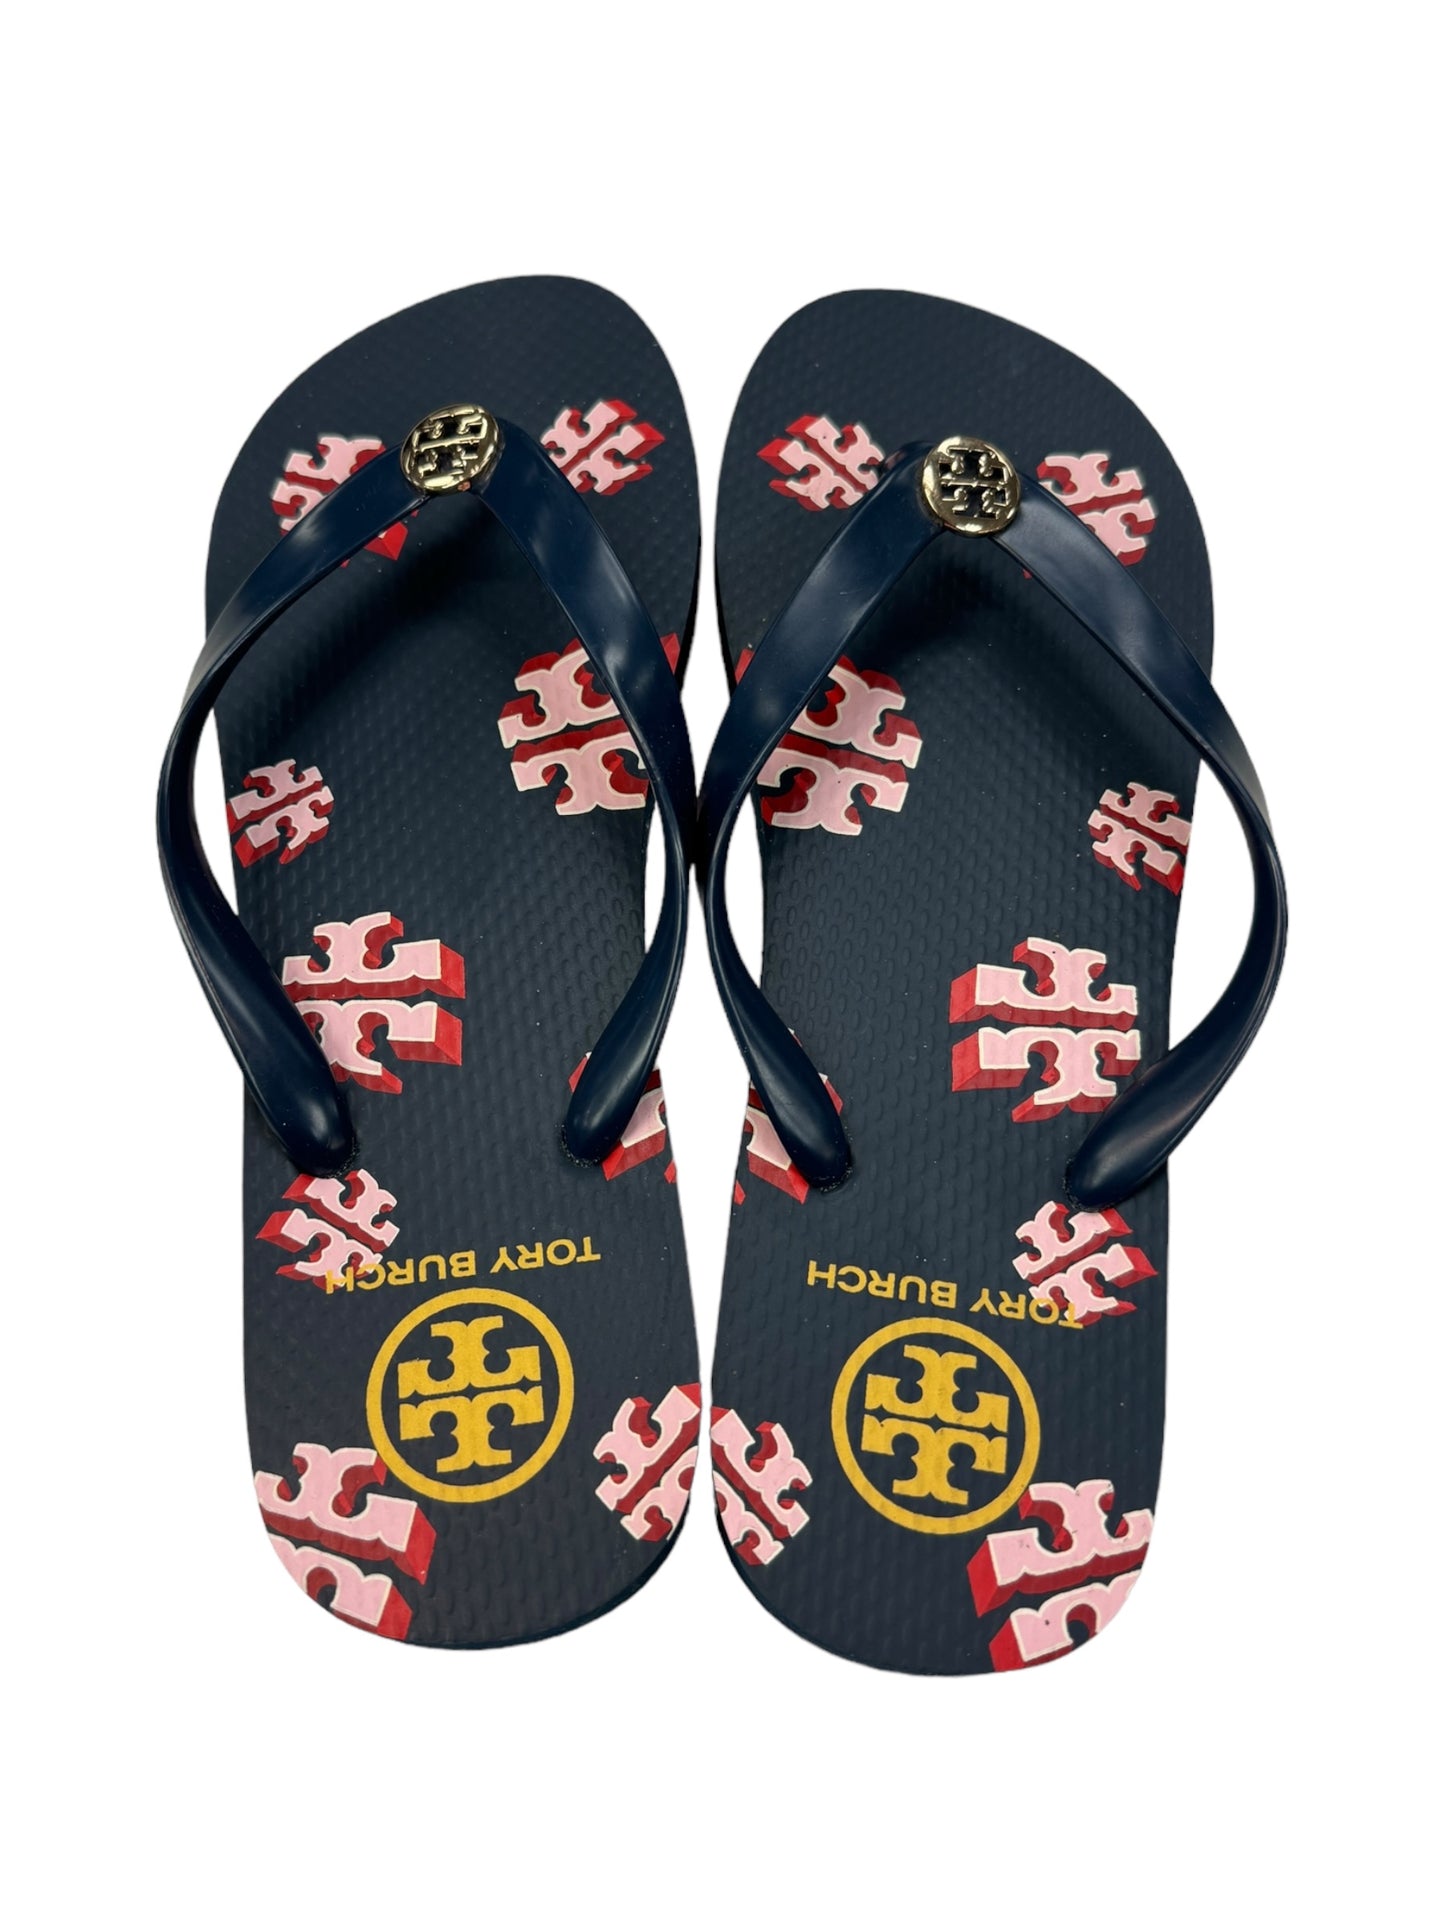 Sandals Designer By Tory Burch  Size: 10